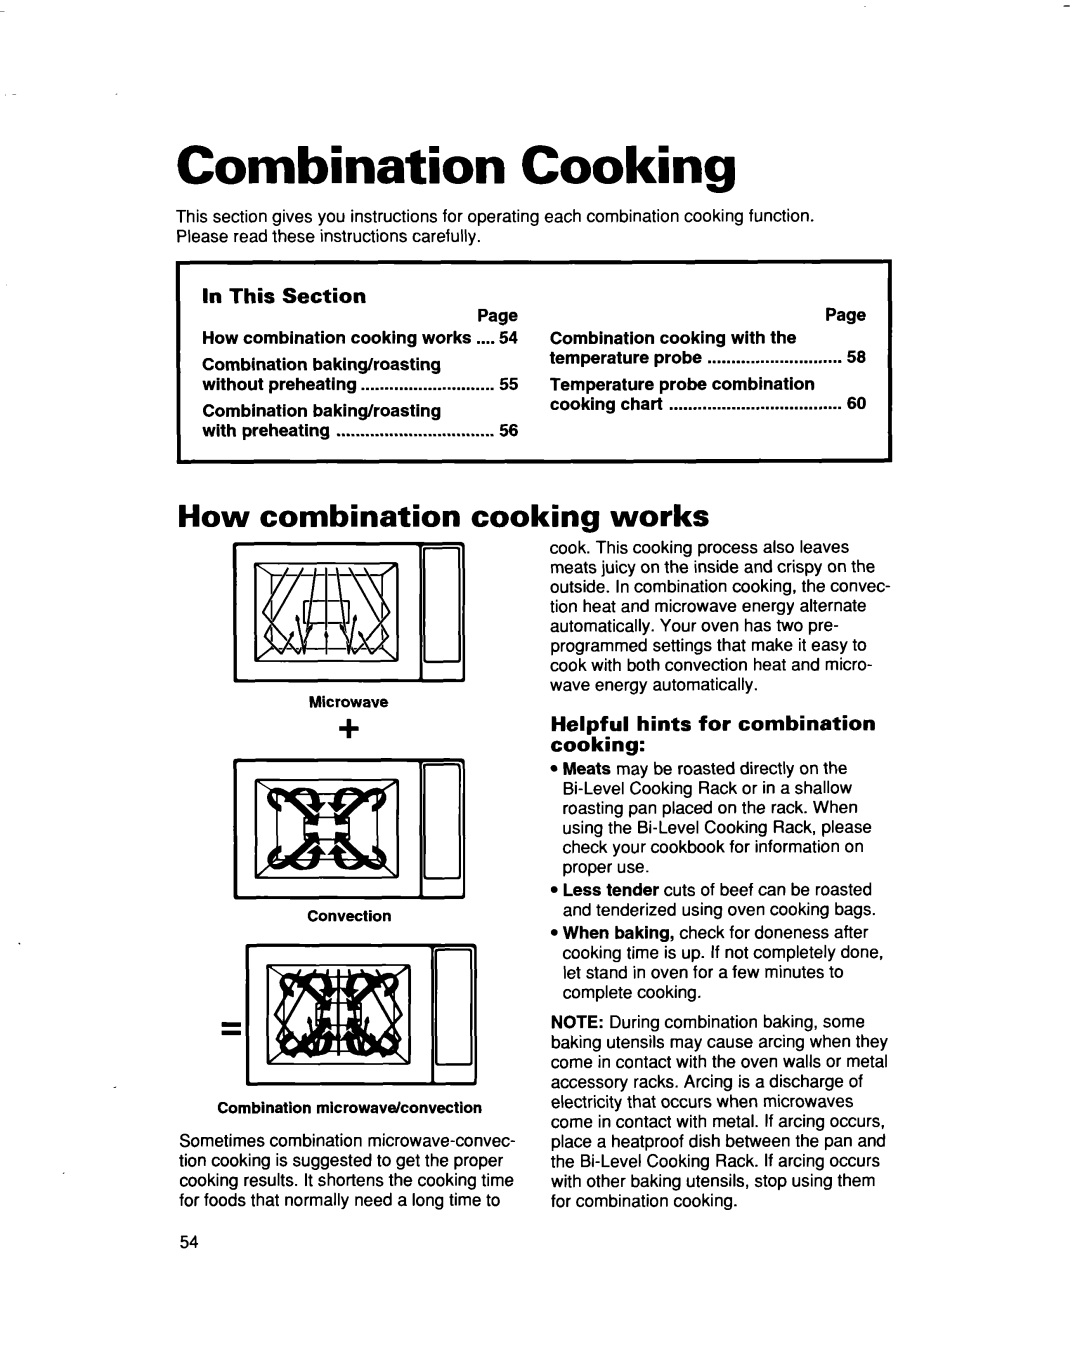 Whirlpool MH9115XB Combination Cooking, How combination cooking works, Section, Helpful hints for combination cooking 